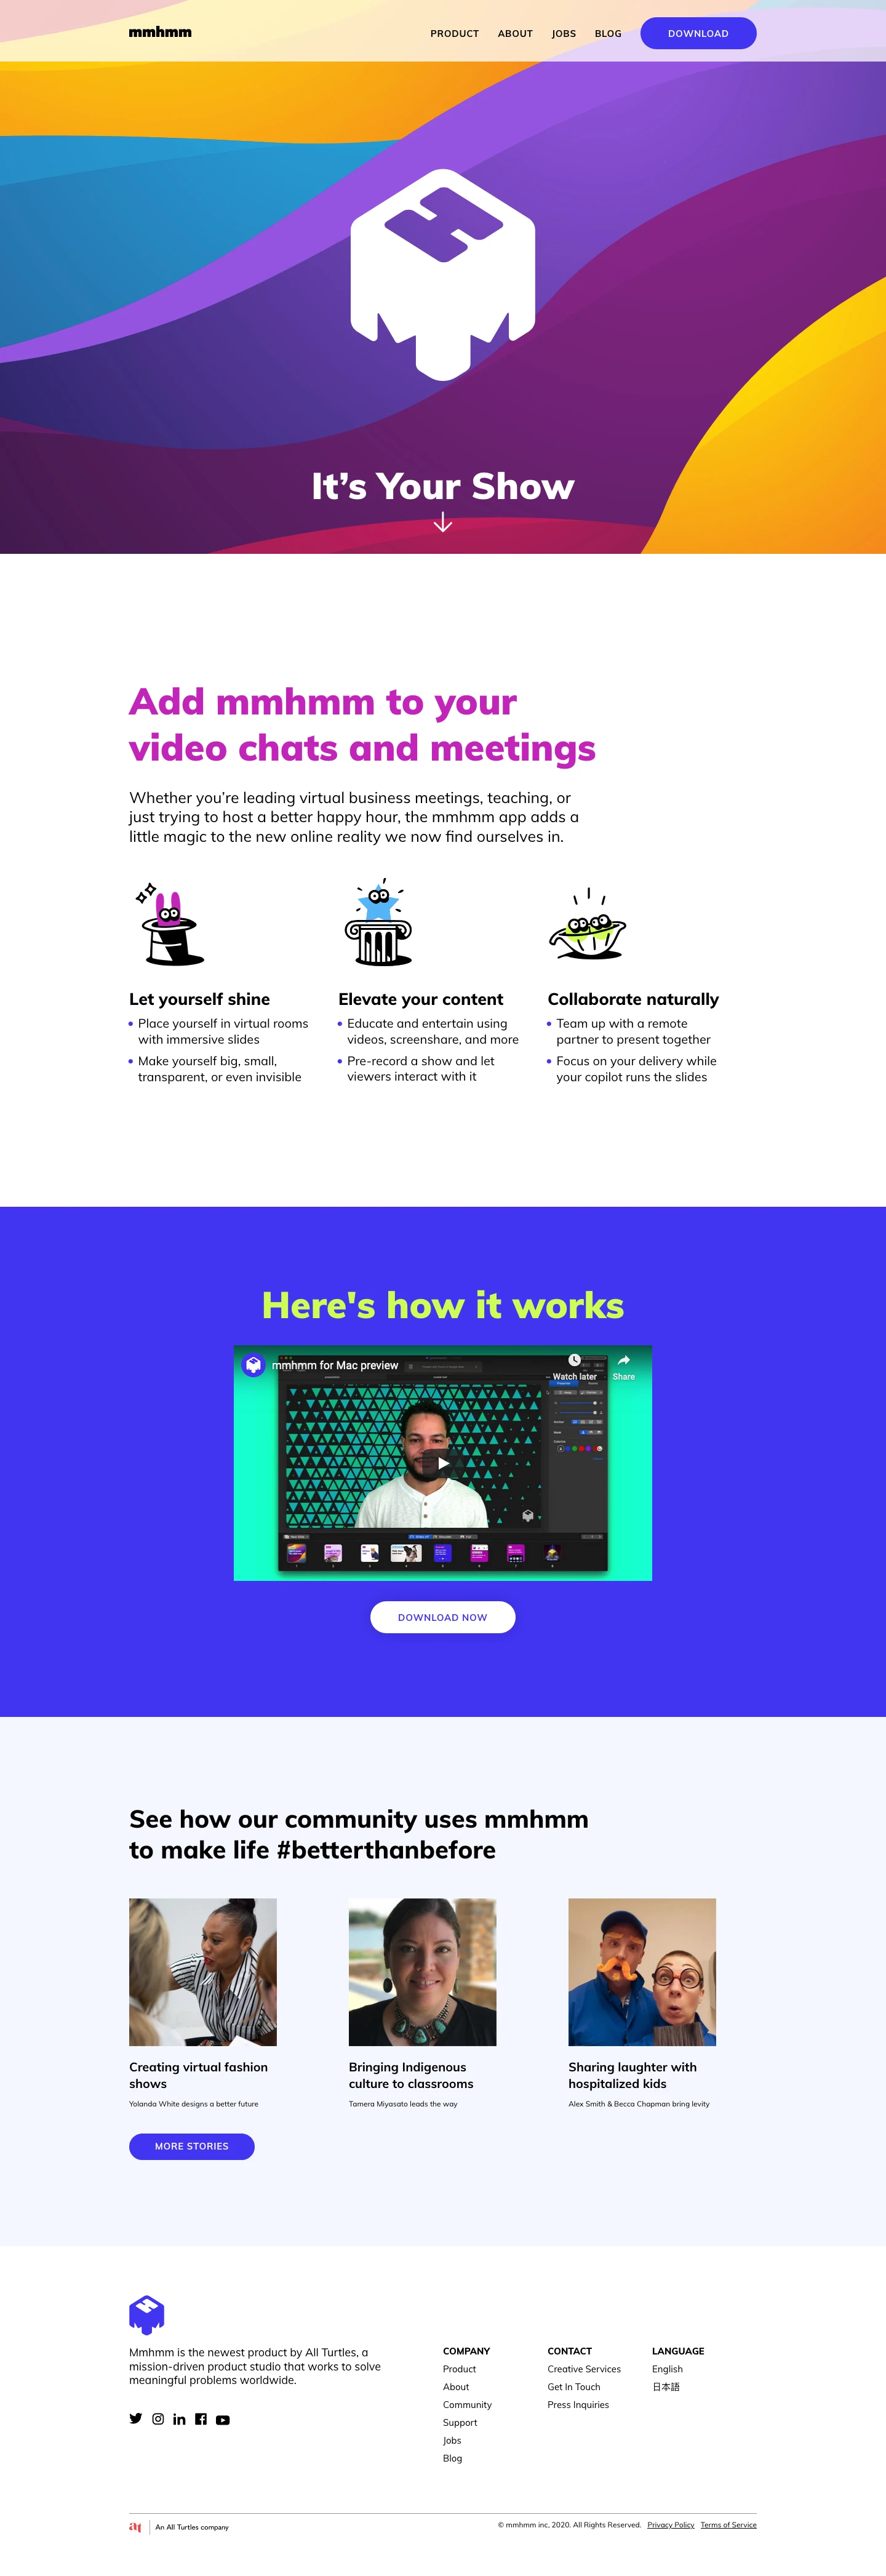 mmhmm Landing Page Example: A new way to communicate via video — both in real-time and asynchronously. Perfect for our new remote reality, add polish and creativity to every presentation.